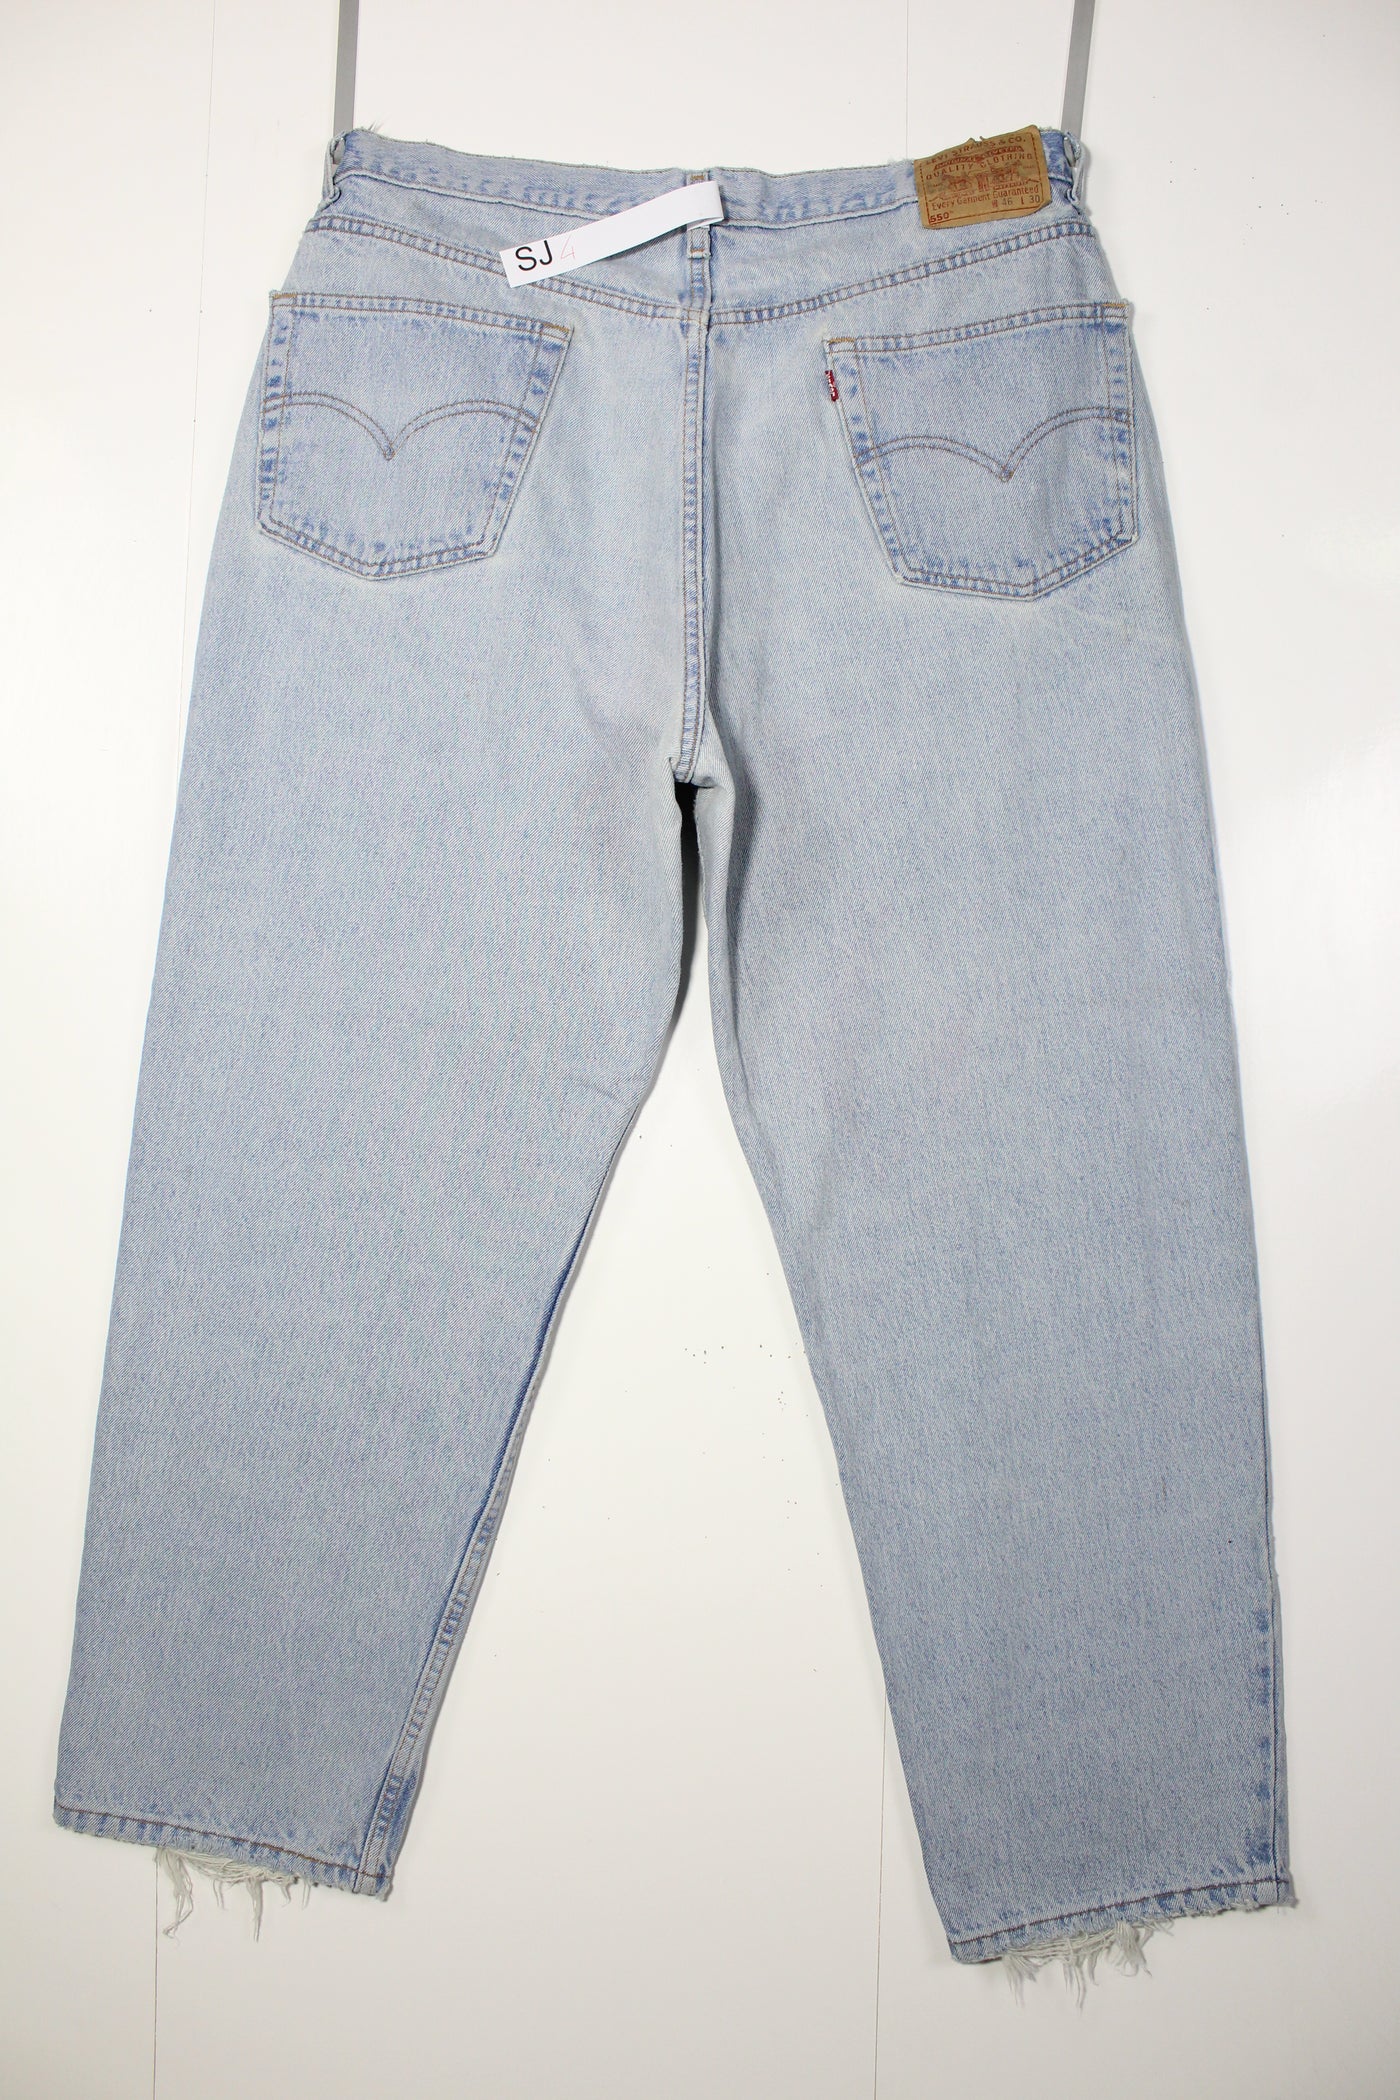 Levi's 550 Relaxed Fit Denim Made In USA W46 L30 Vintage